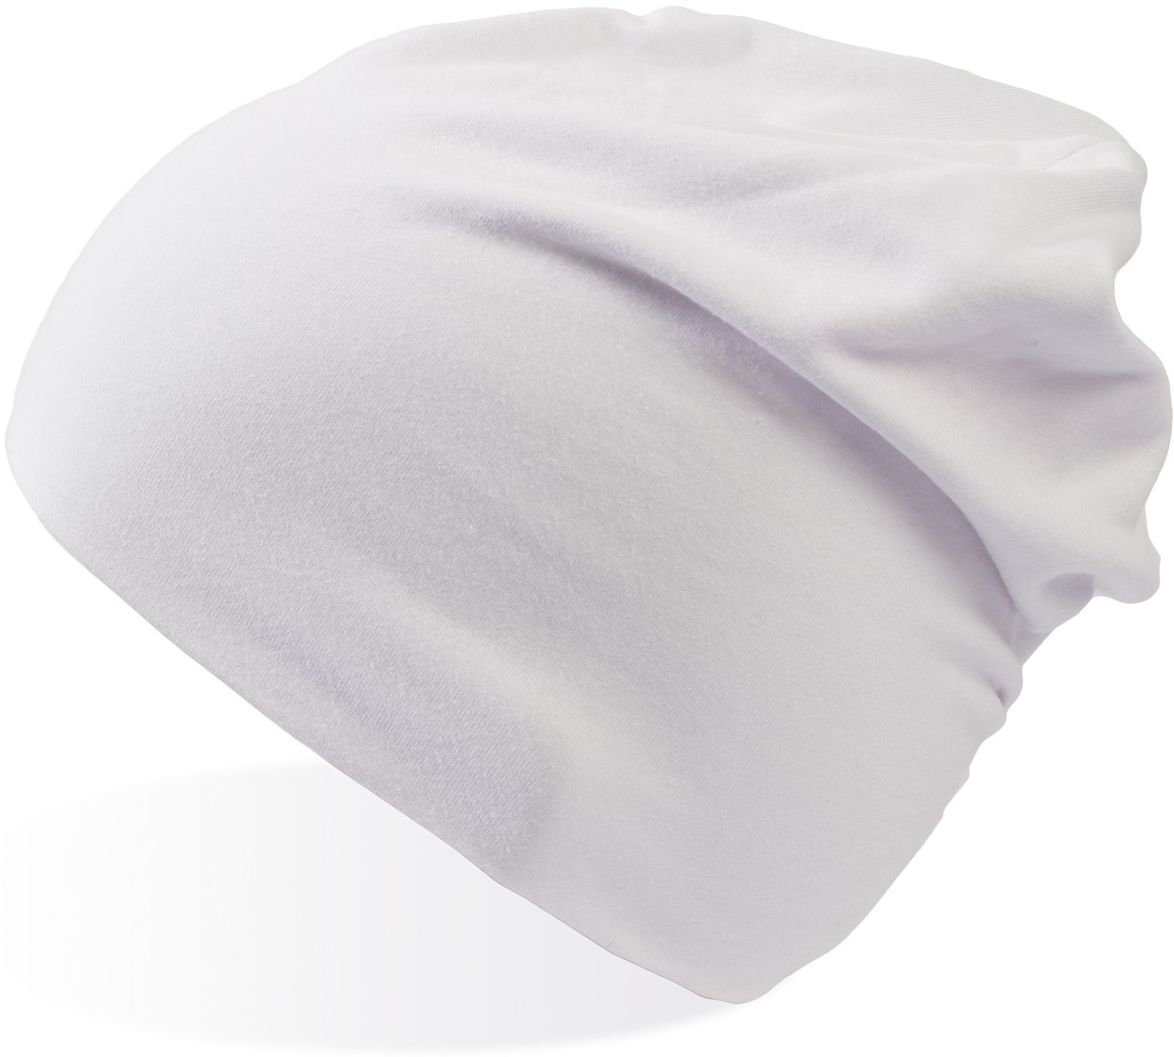 Flash Jersey Slouch Beanie Adult - COOZO